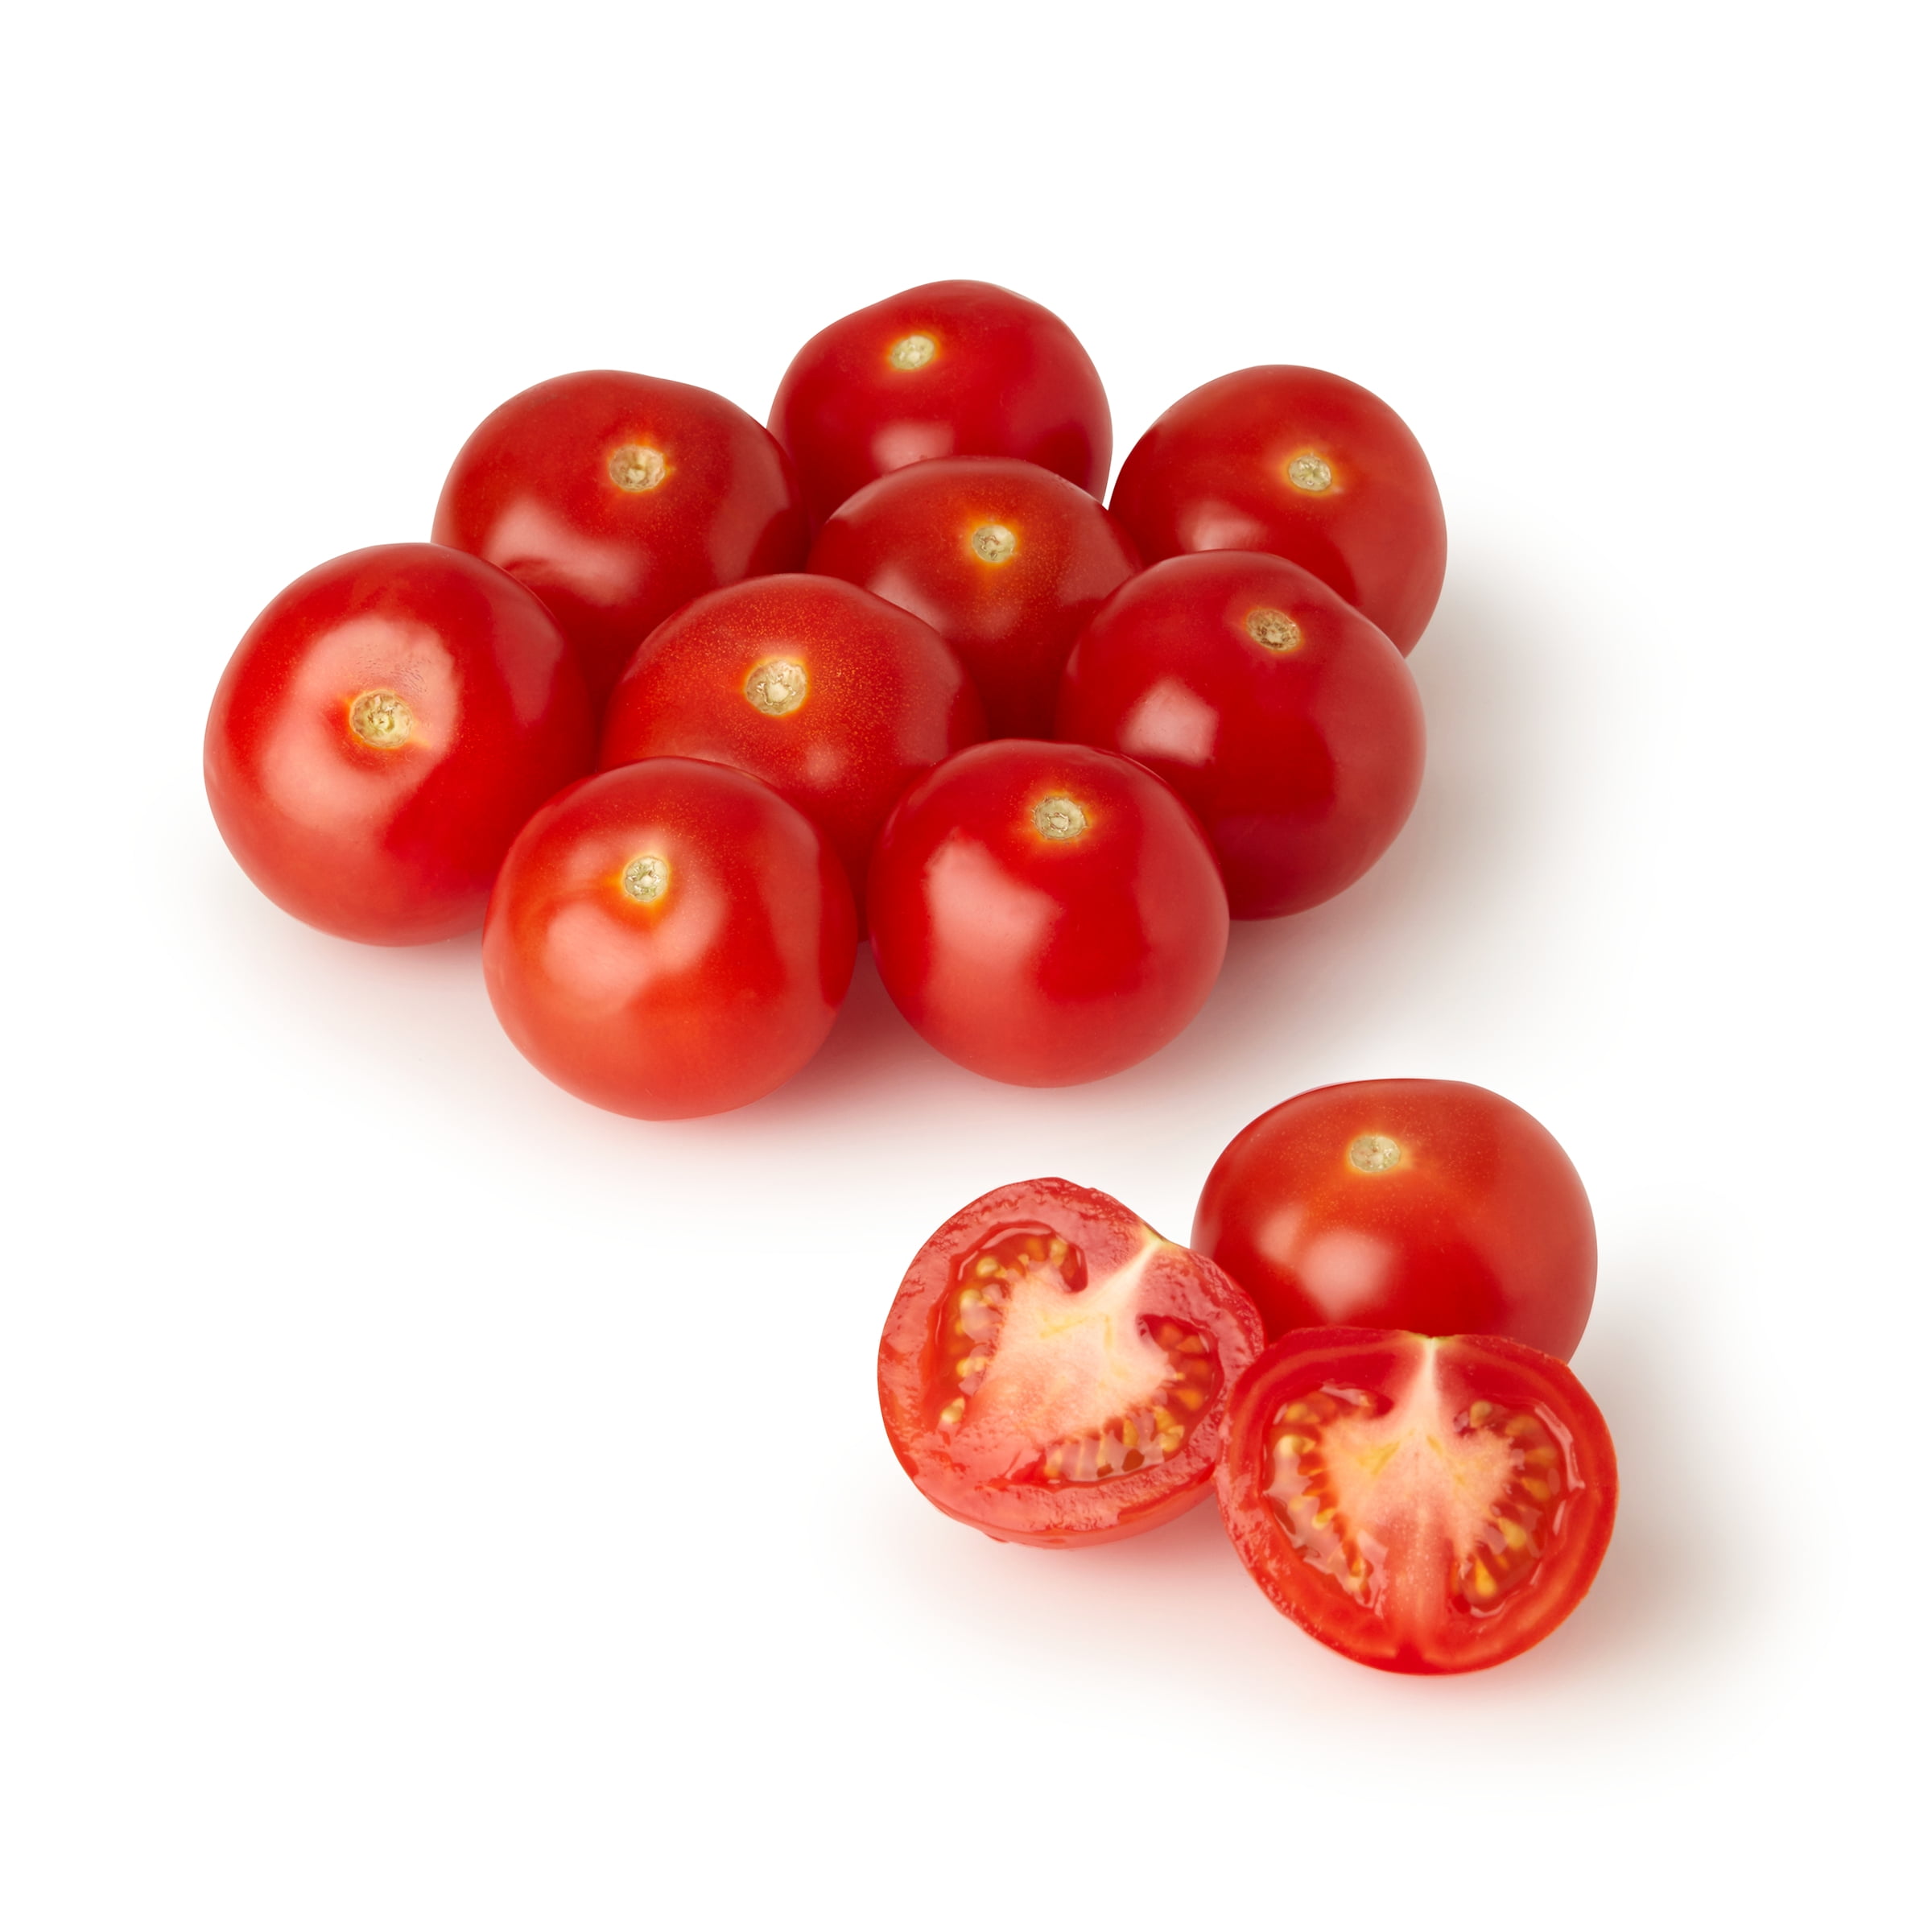 Discover Ruby Slippers: A Flavorful Cocktail Tomato for Your Garden